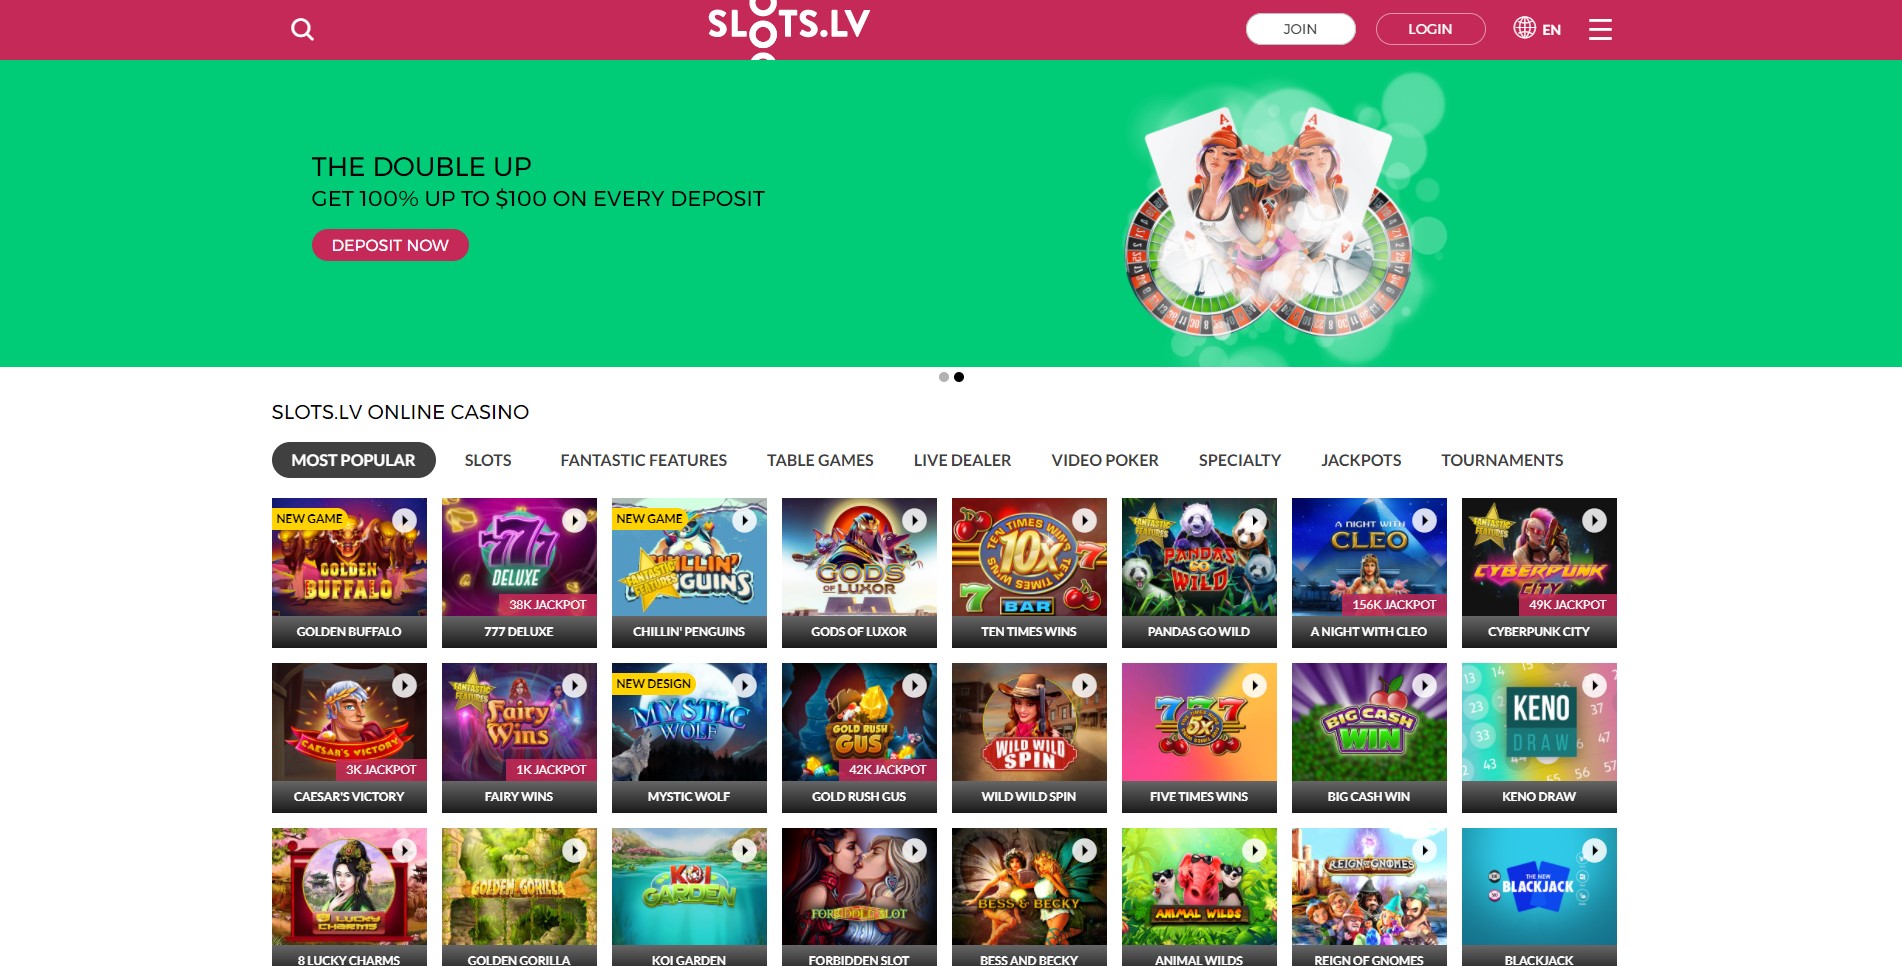 Slots.lv homepage with most popular games in view